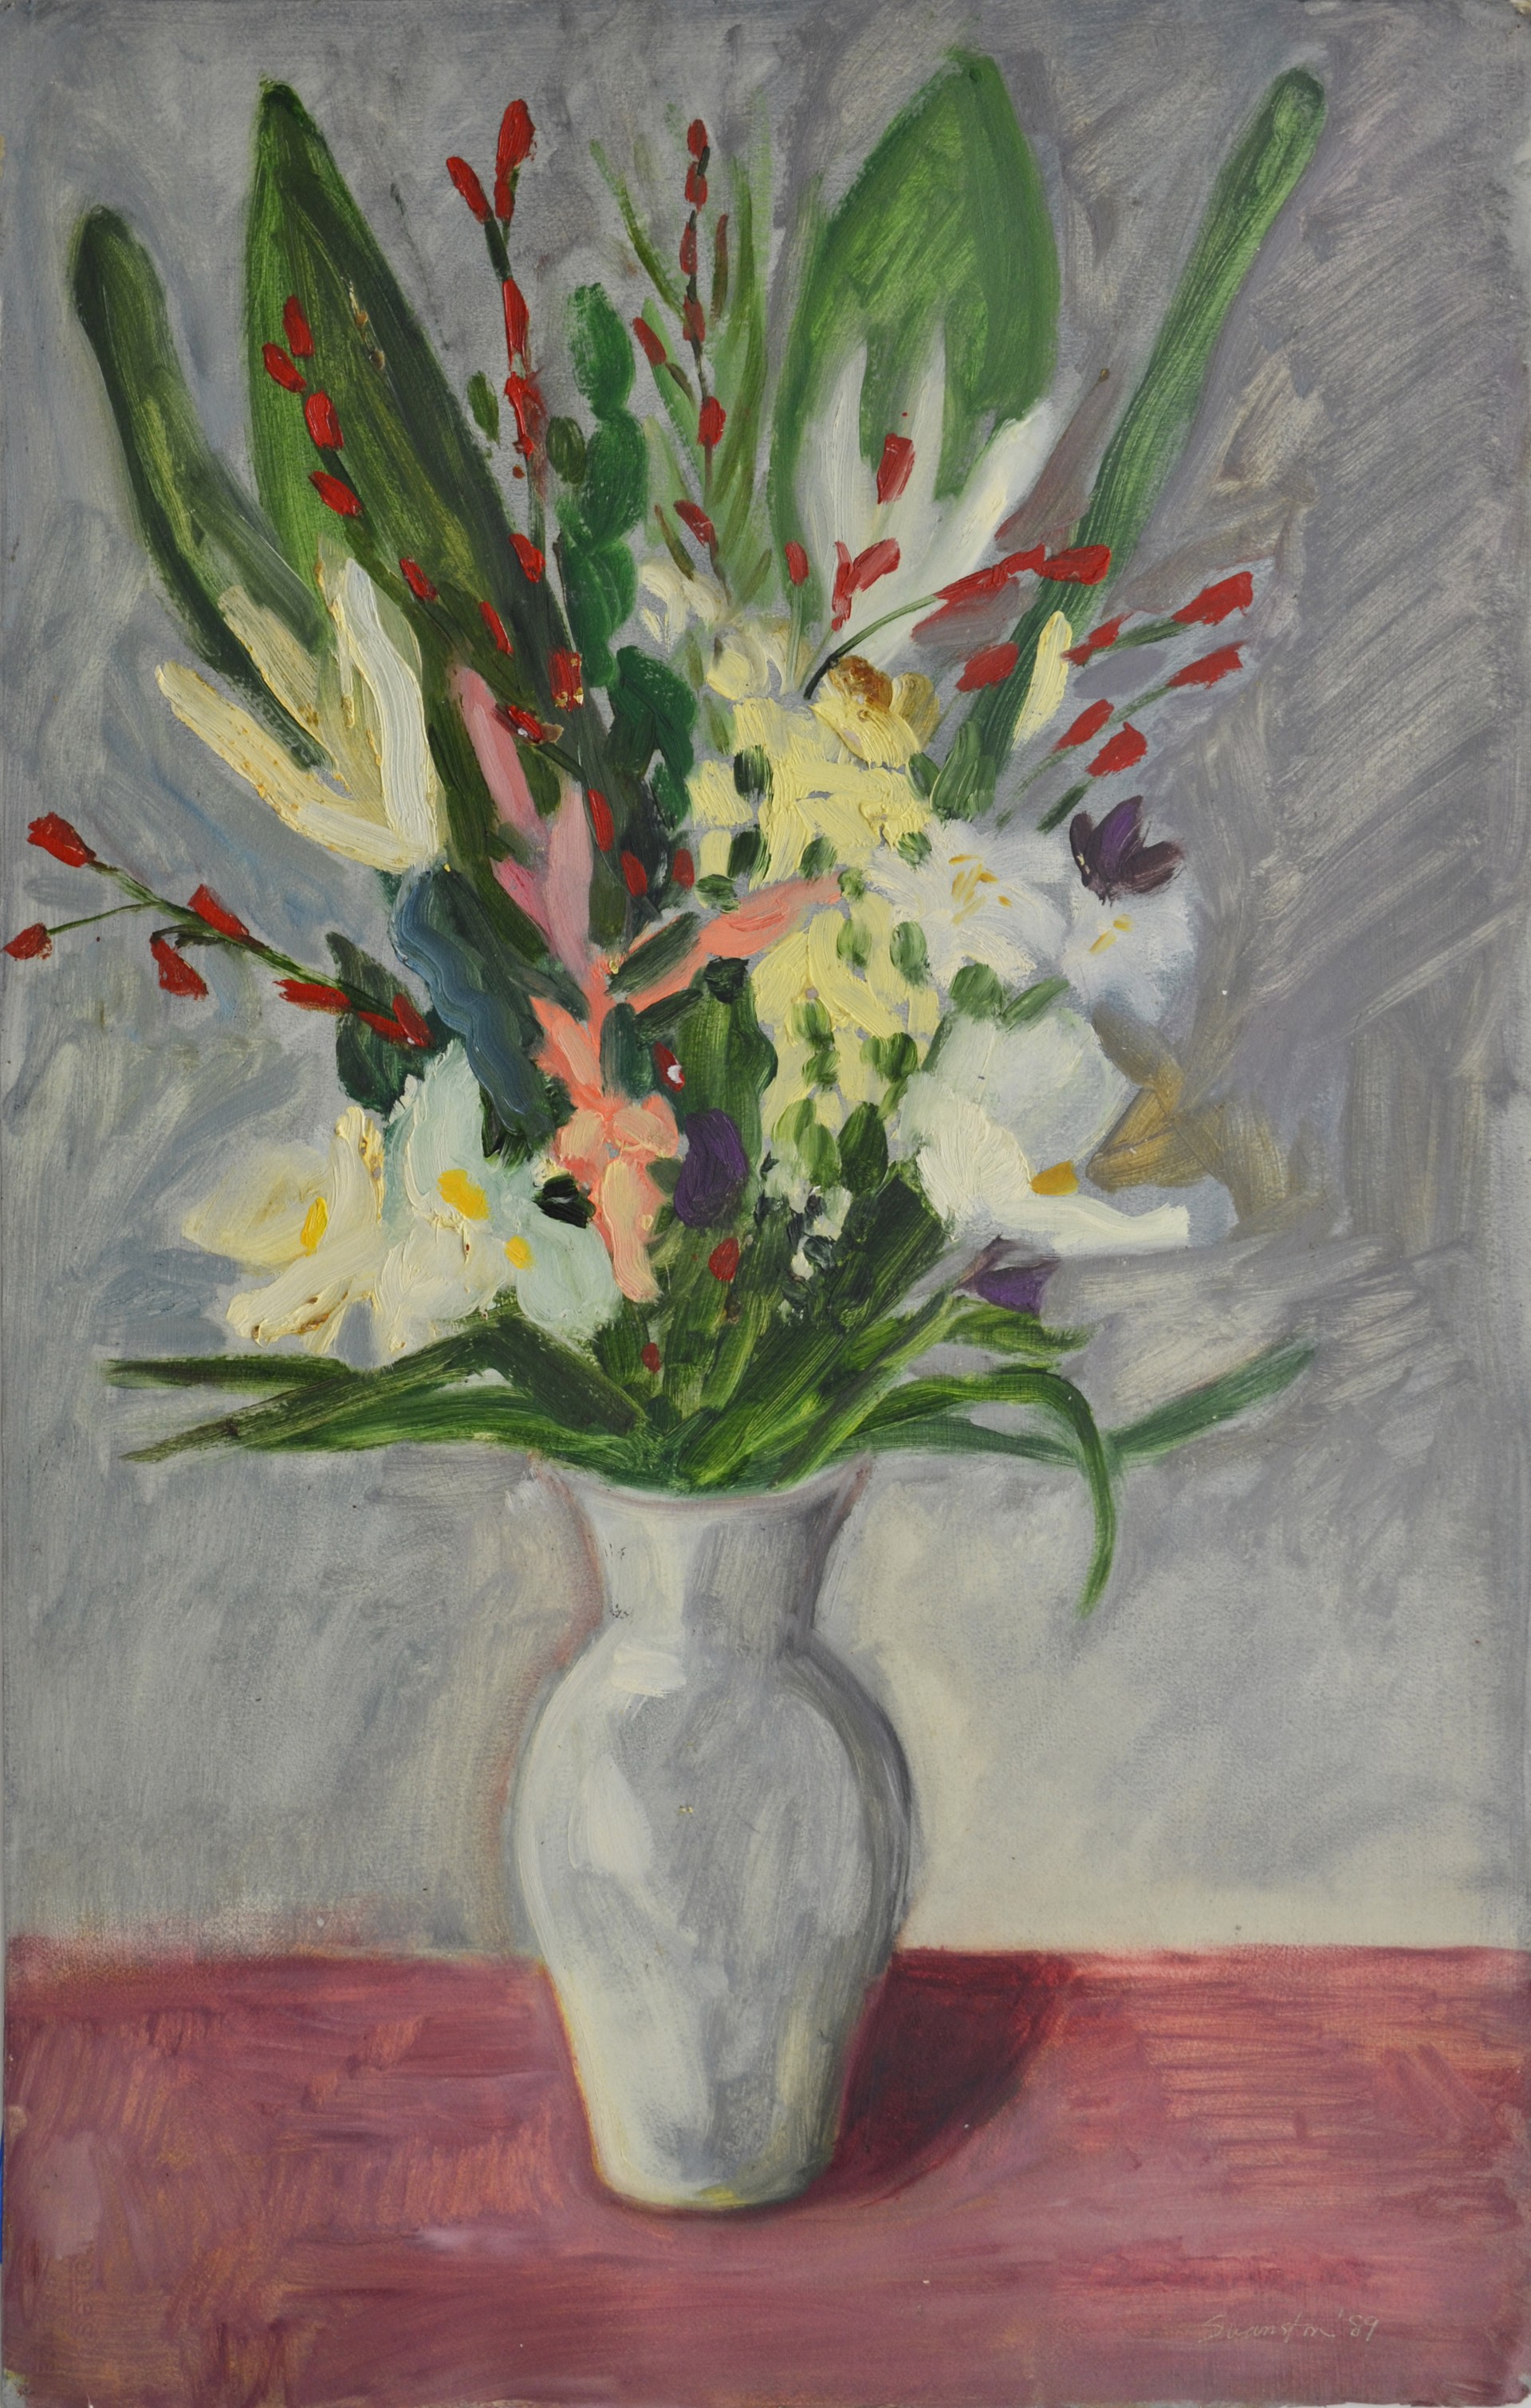 Full Blooms in the White Vase by Gail Foster